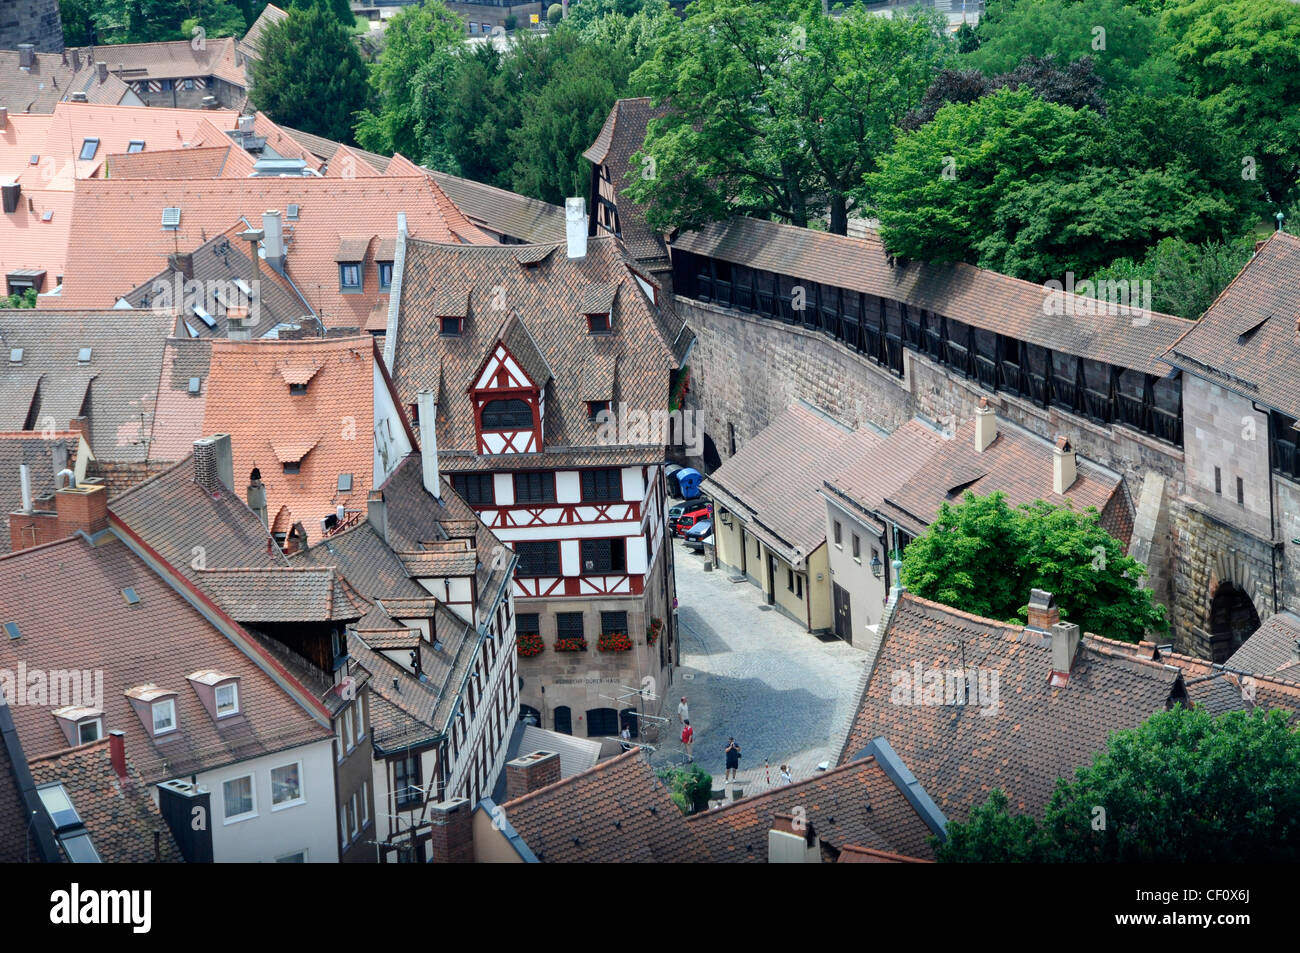 The old and new city of Nuremberg from the Sinwell Tower in the Kaiserburg ( Nuremberg Imperial castle) in Germany Stock Photo